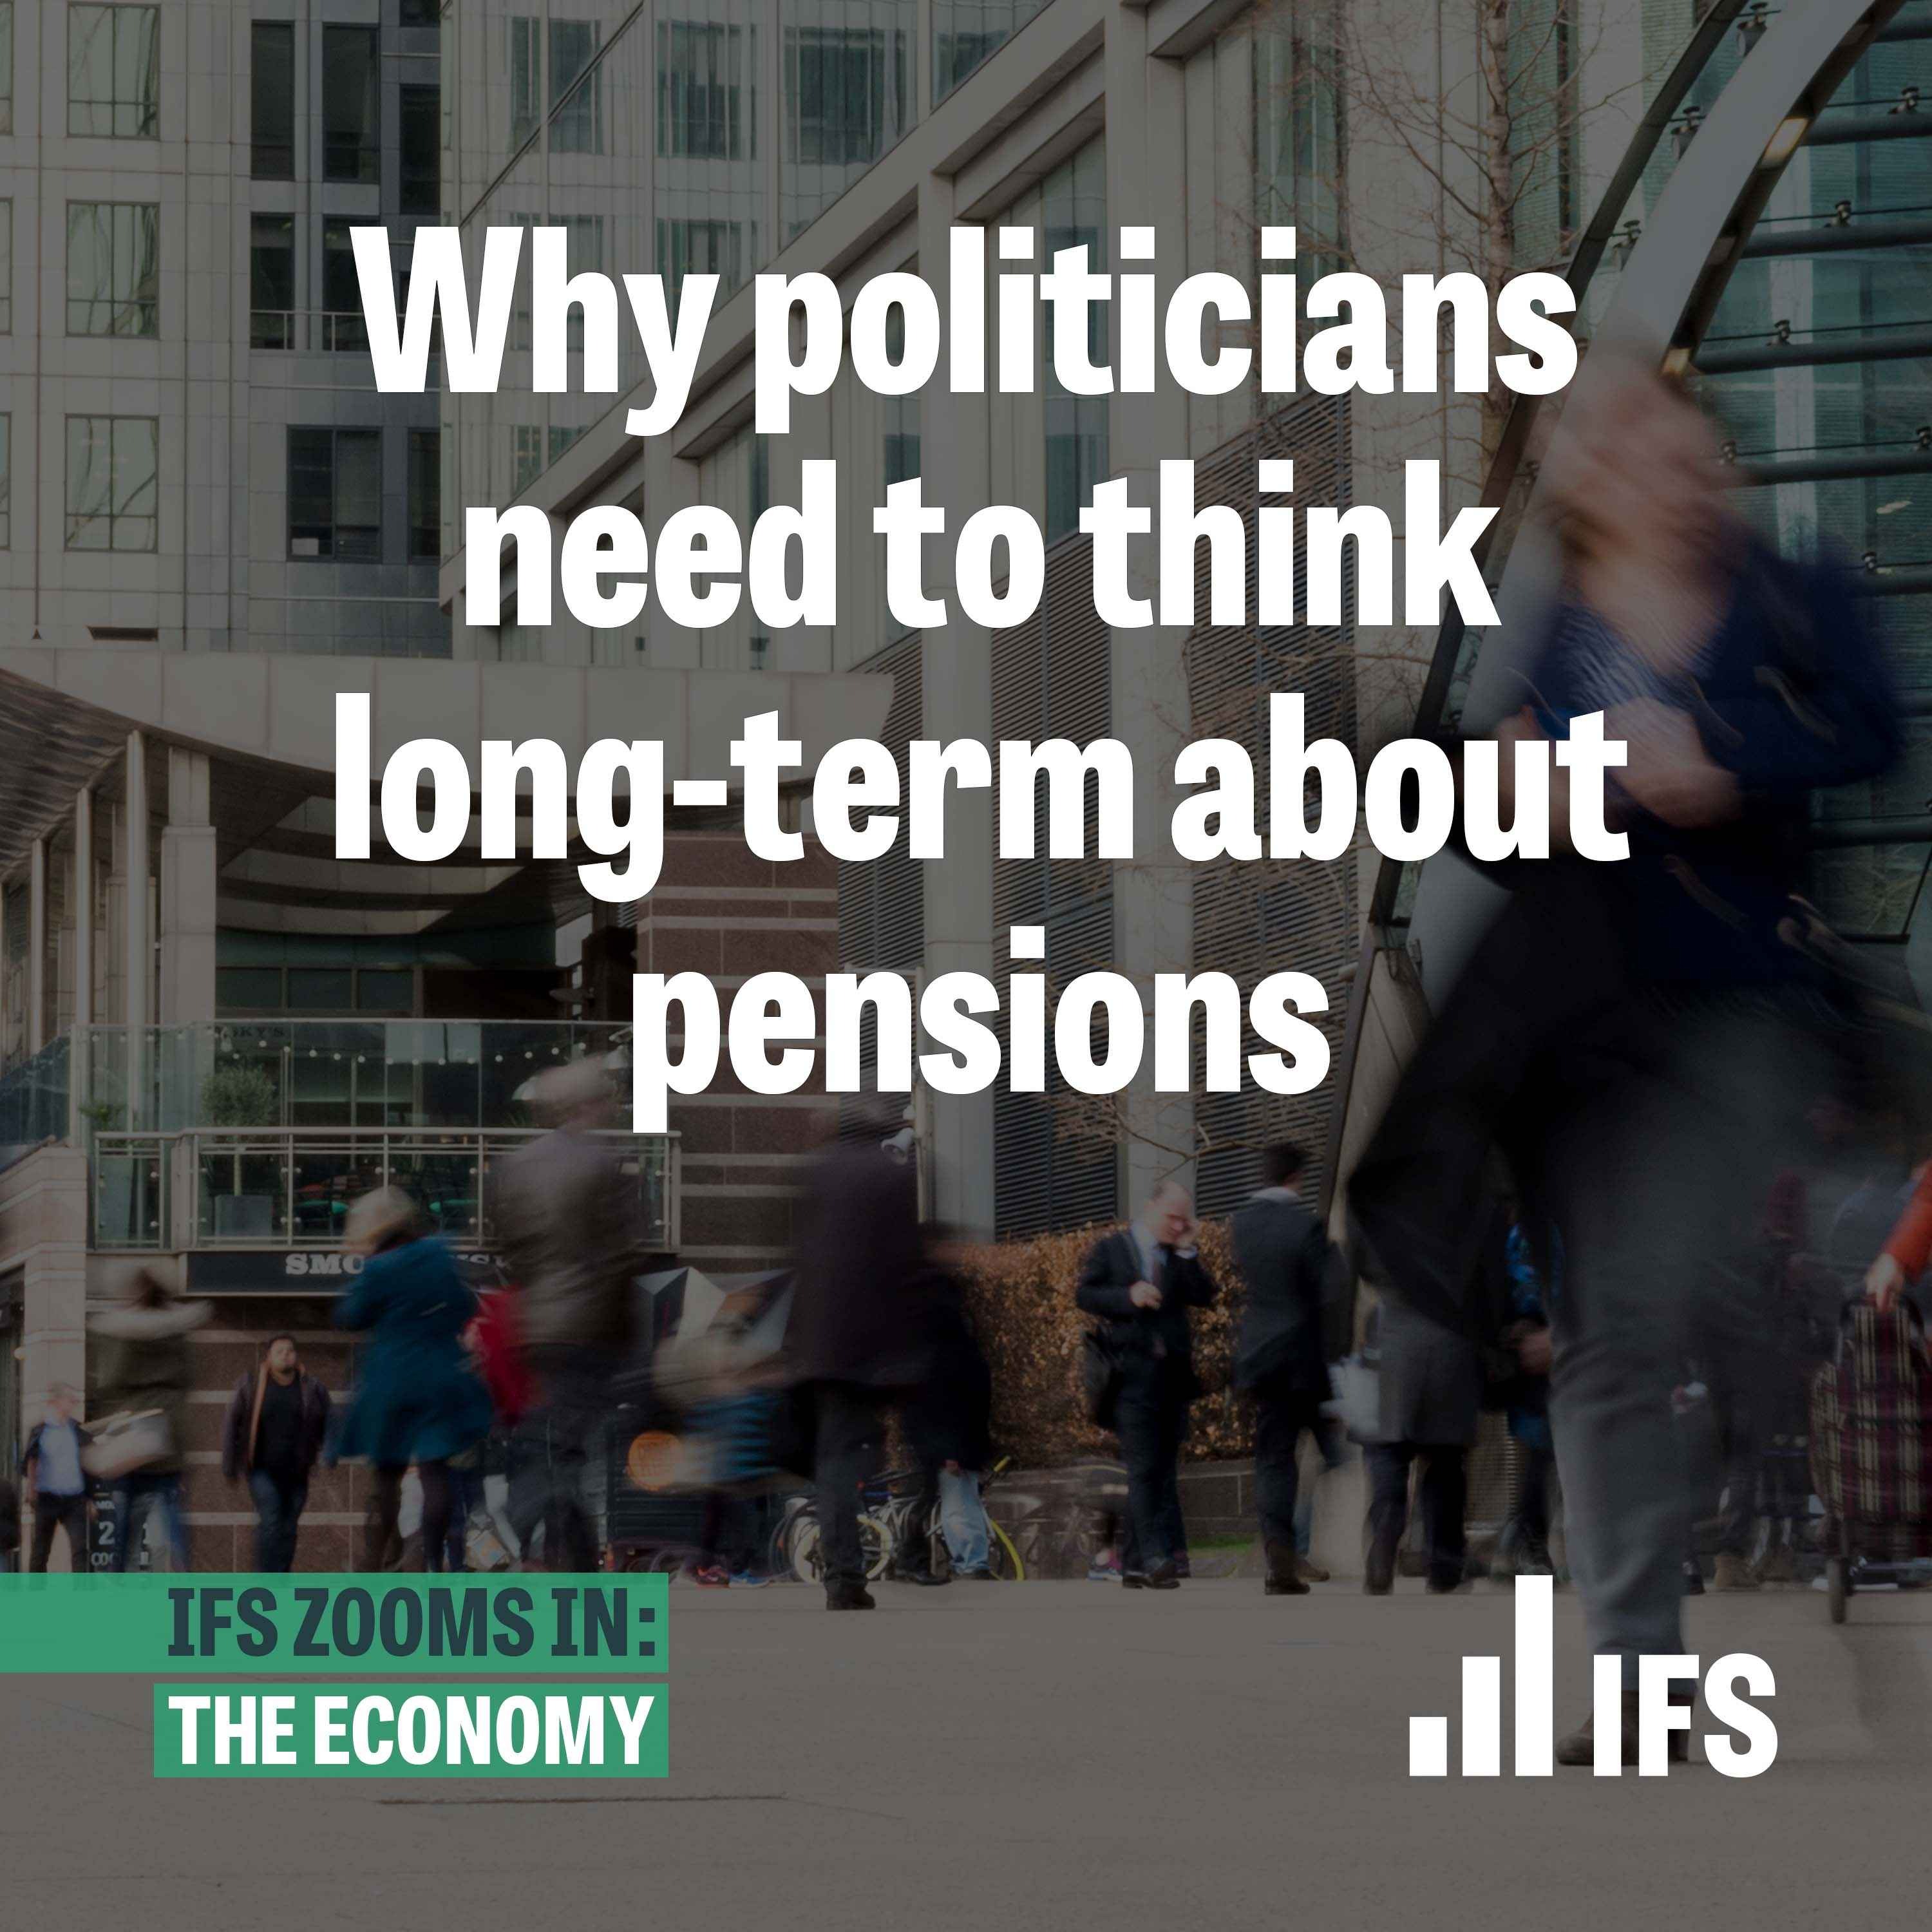 Why politicians need to think long-term about pensions